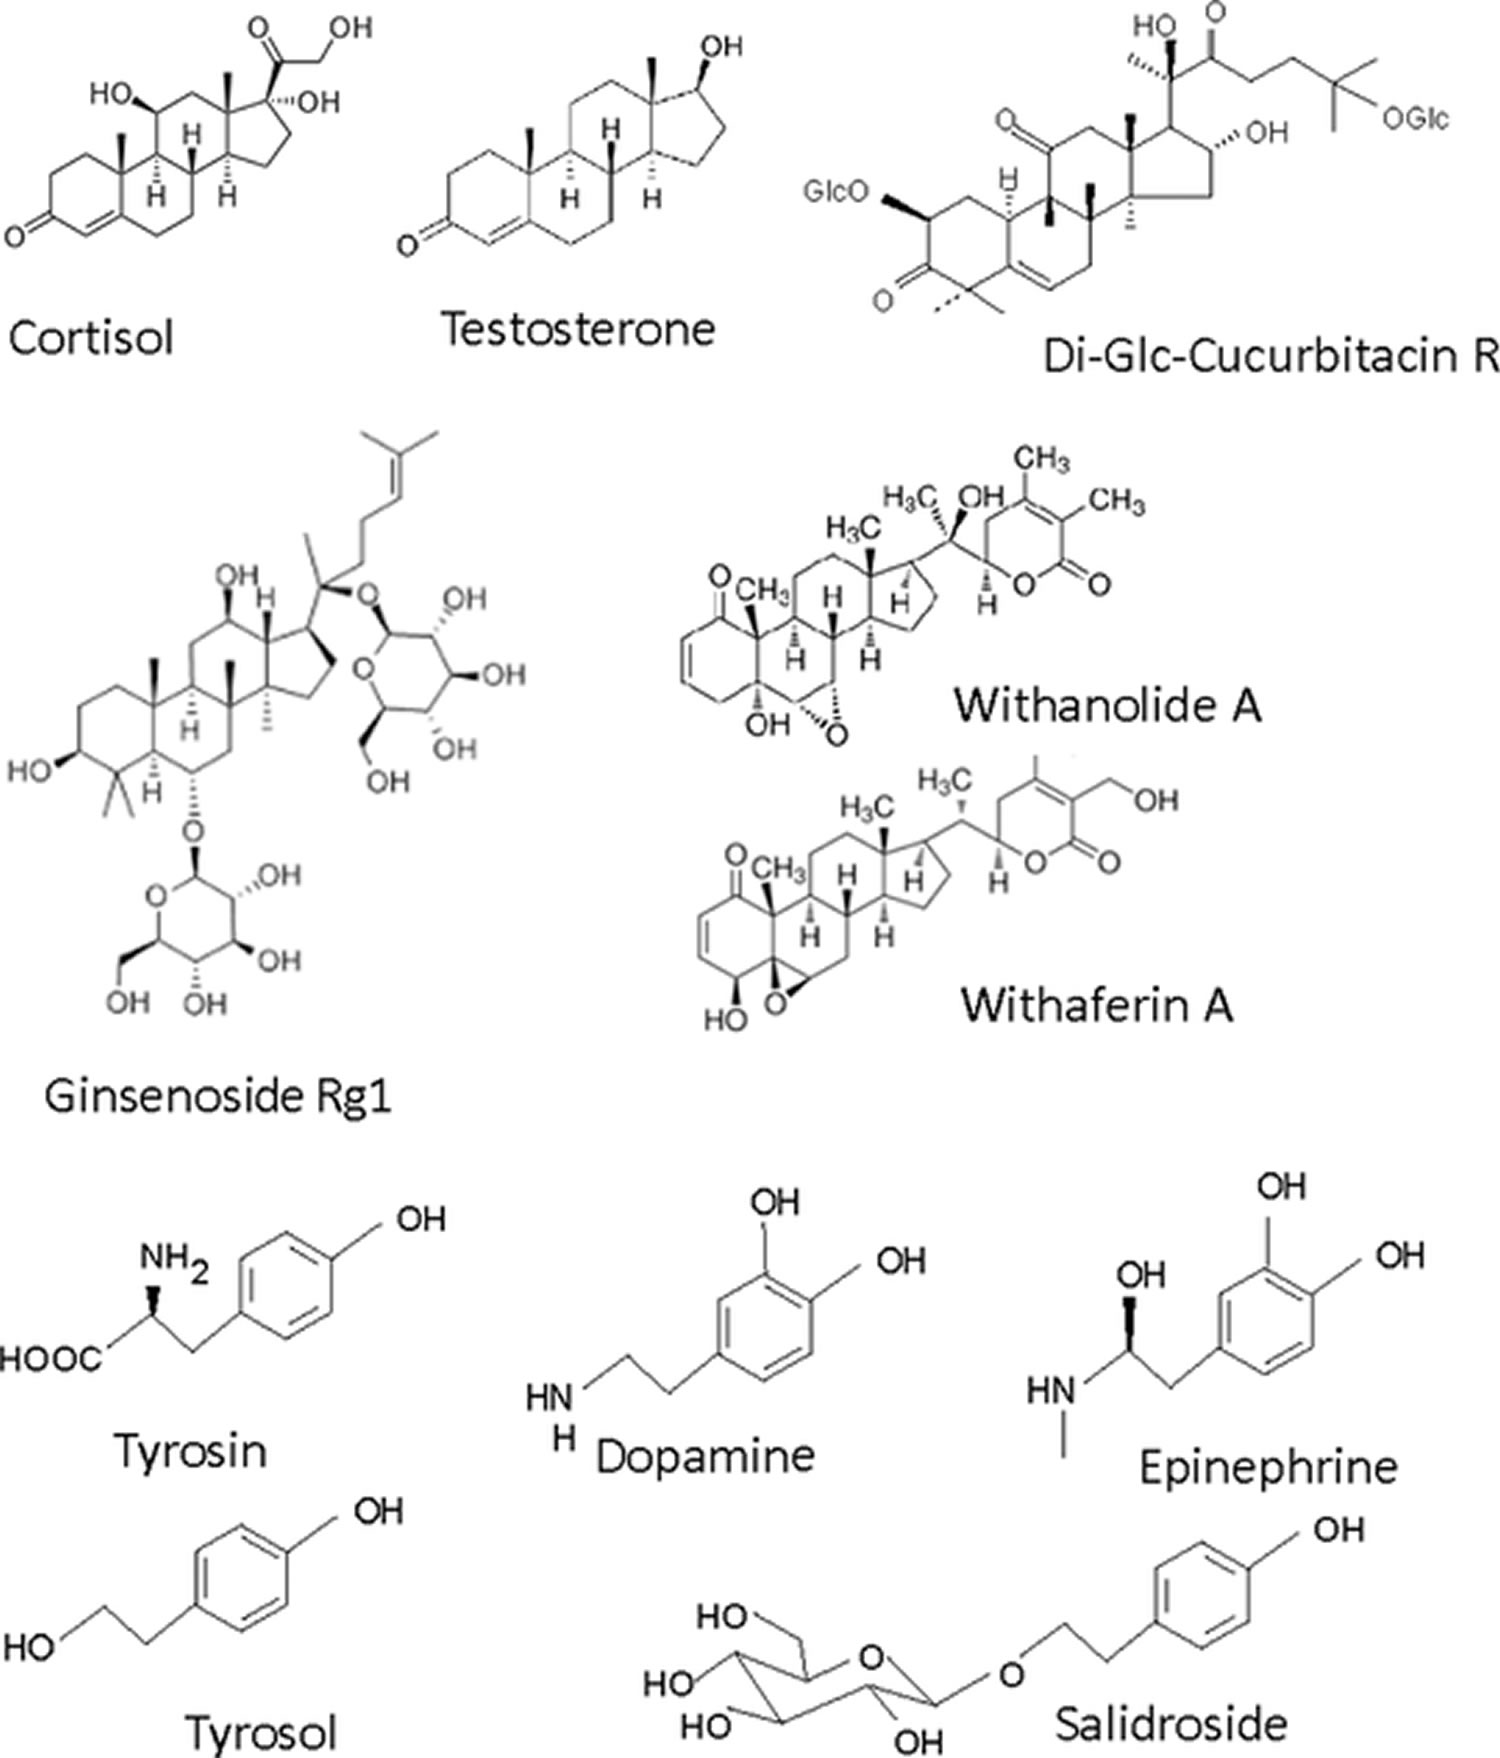 Chemical structures of adaptogenic compounds of plant origin